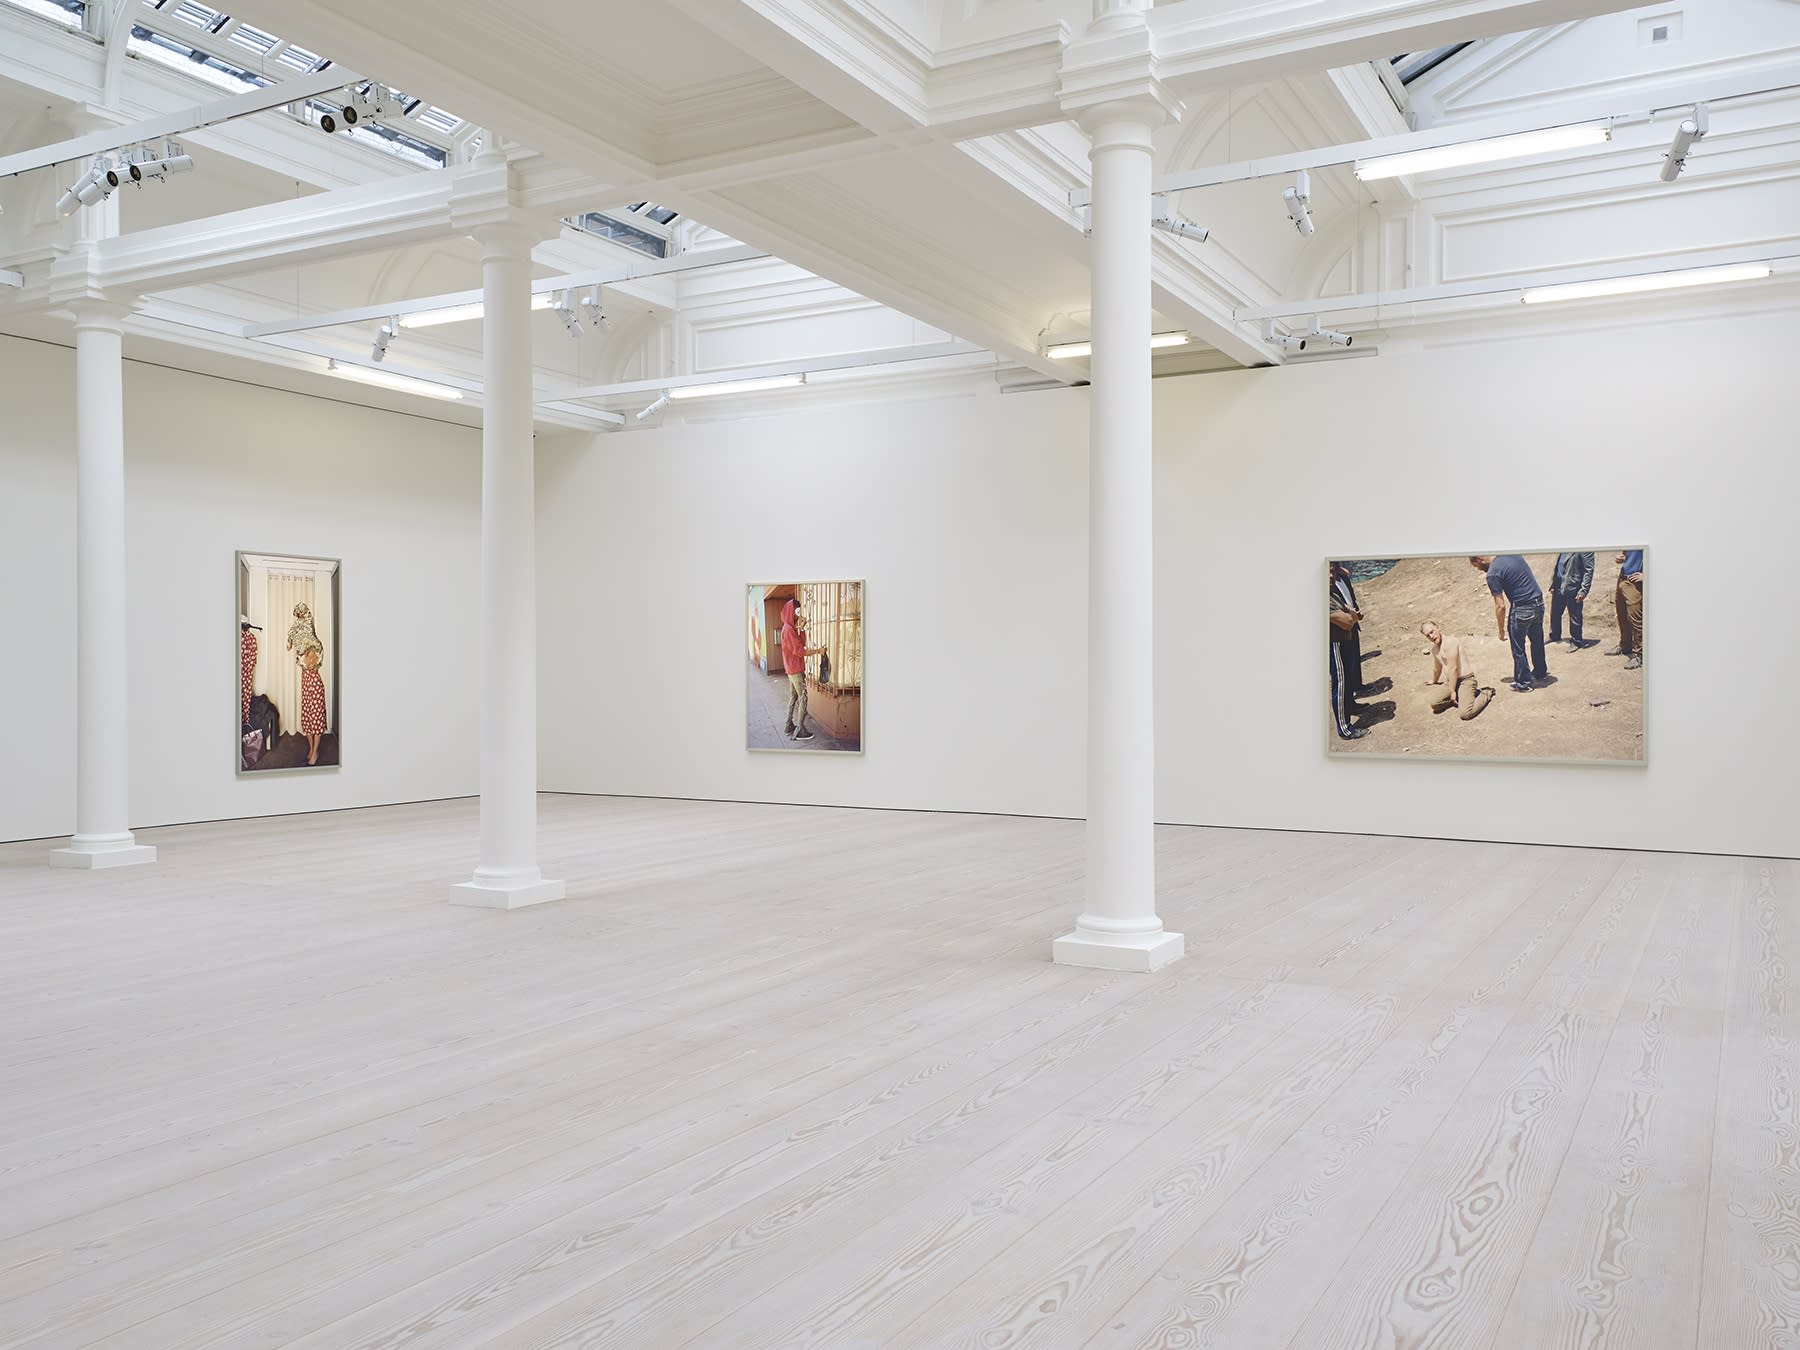 3 large photographs hang in a white room with columns and skylights. From left to right: A figure in a red polka dot dress; a man in a red sweatshirt and white mask; and a shirtless man on the ground surrounded by 6 clothed men. 